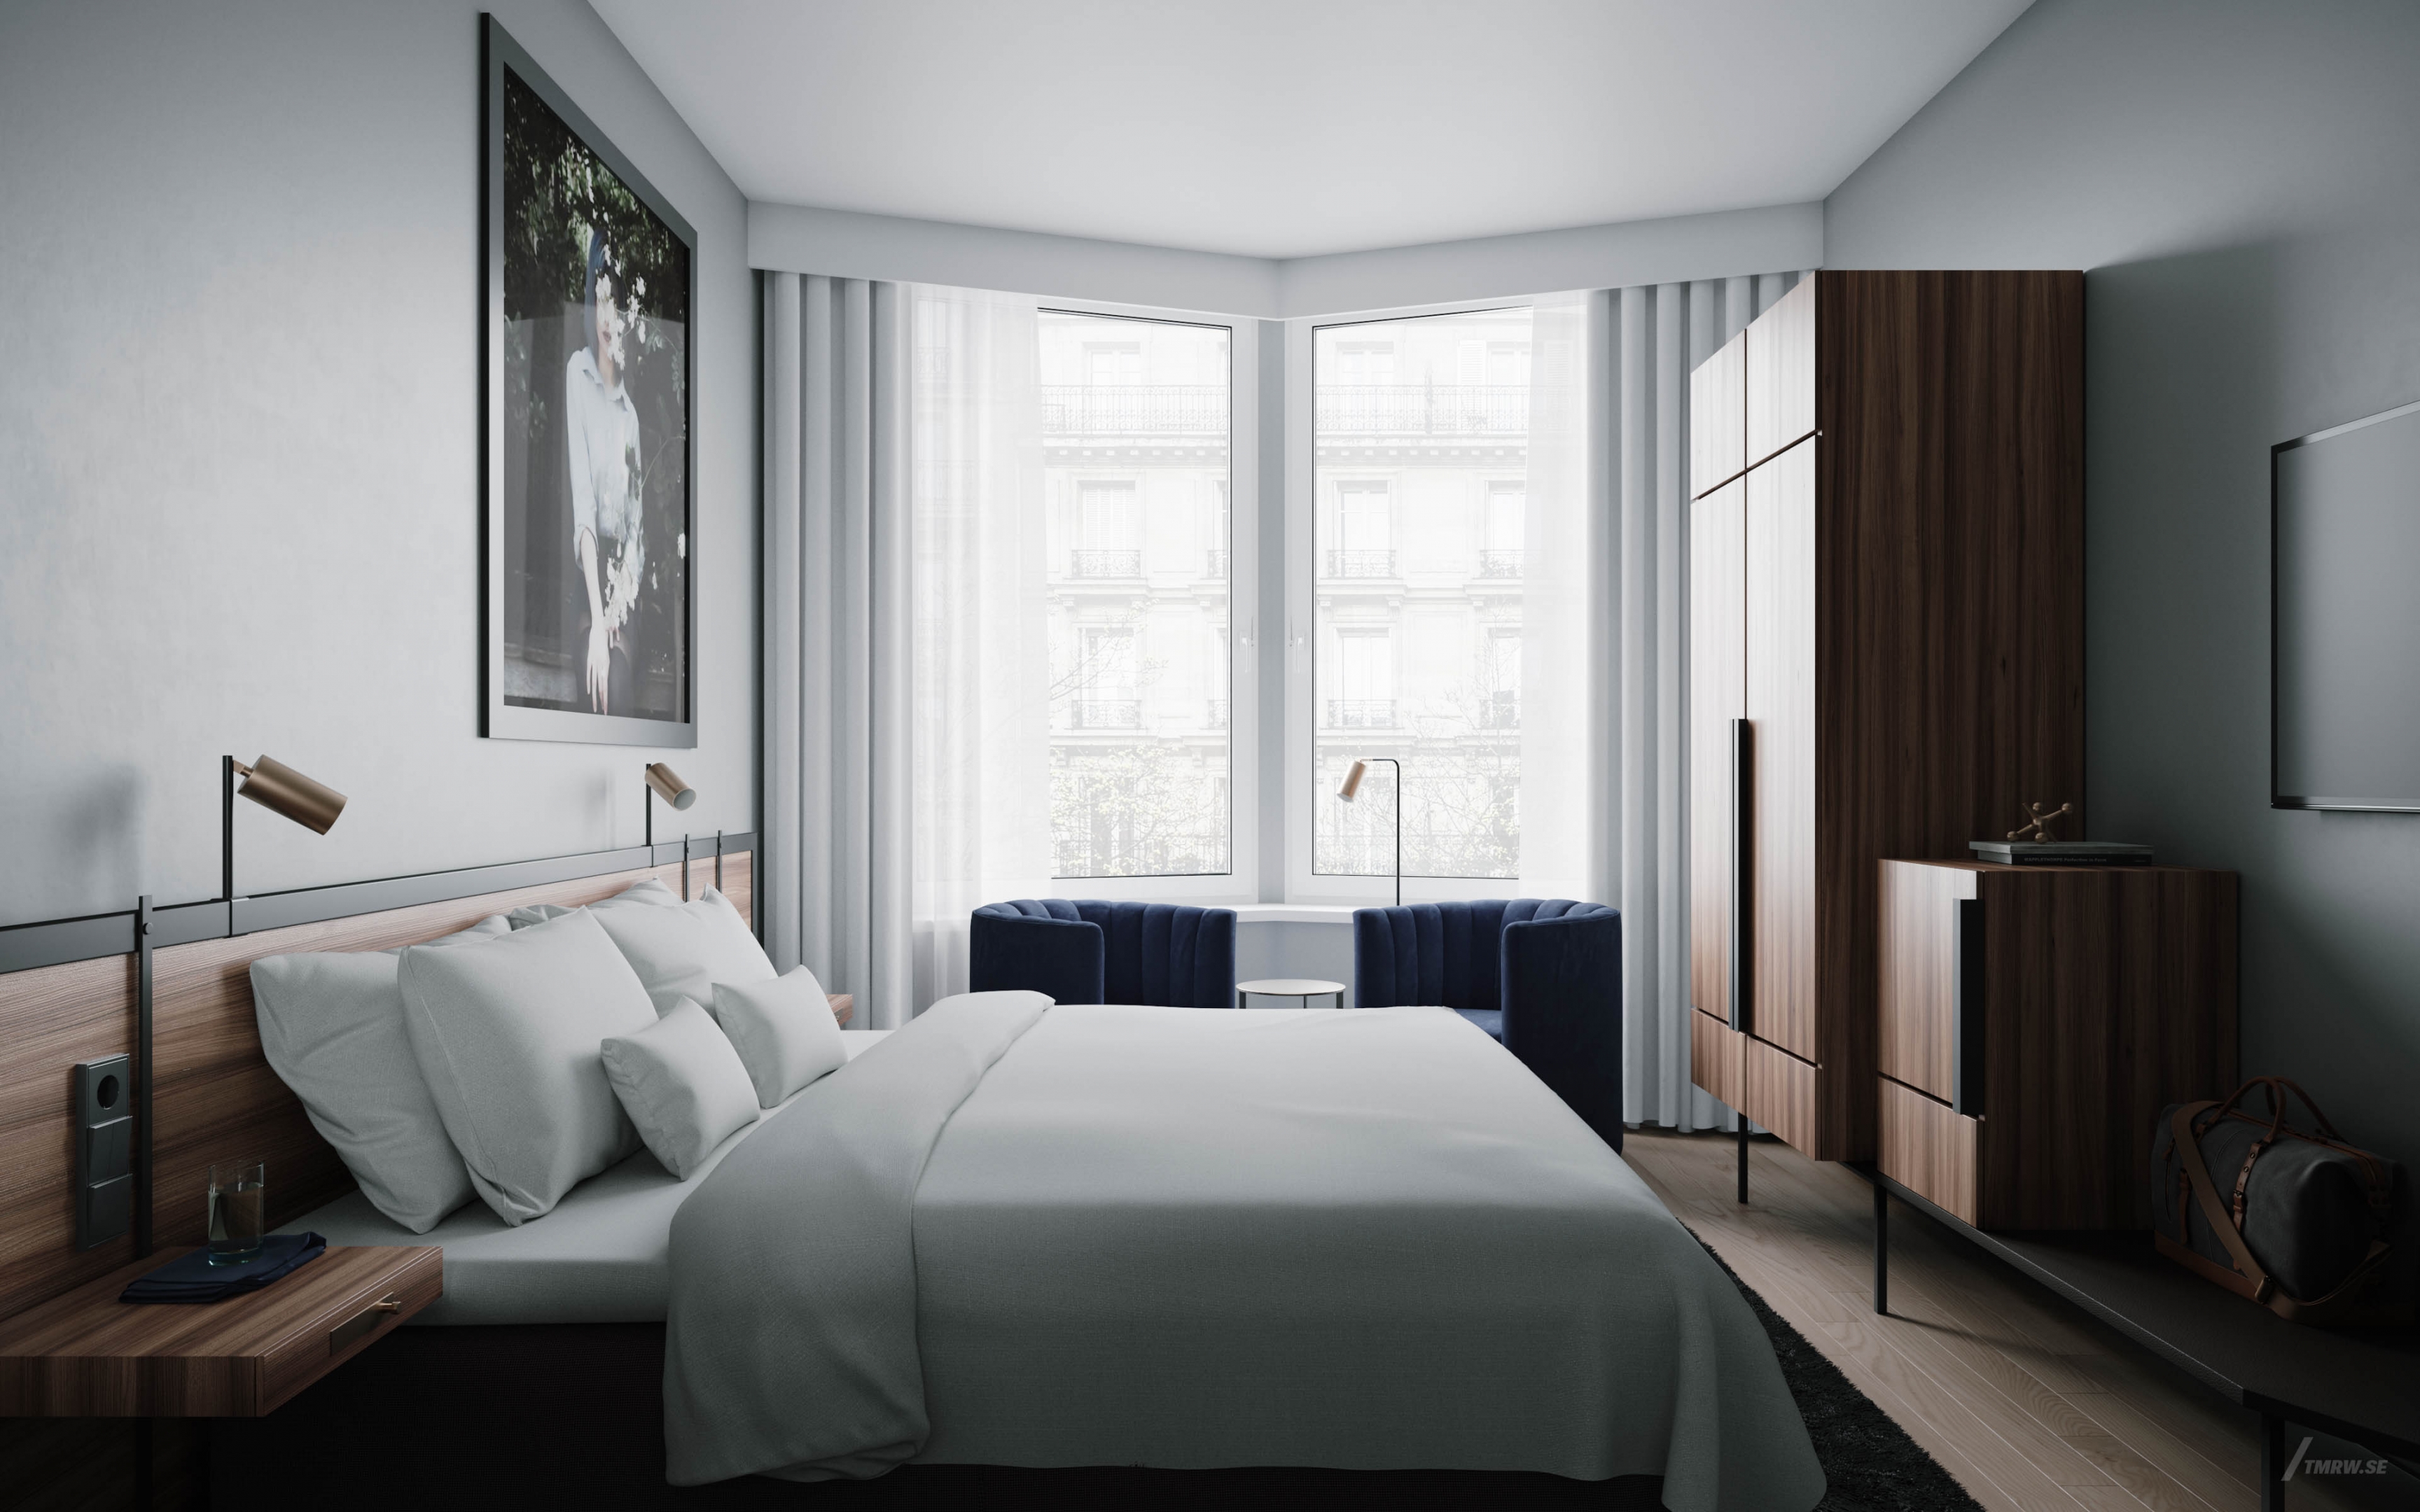 Architectural visualization of a bedroom for Doos Architects from an interior view in day light.